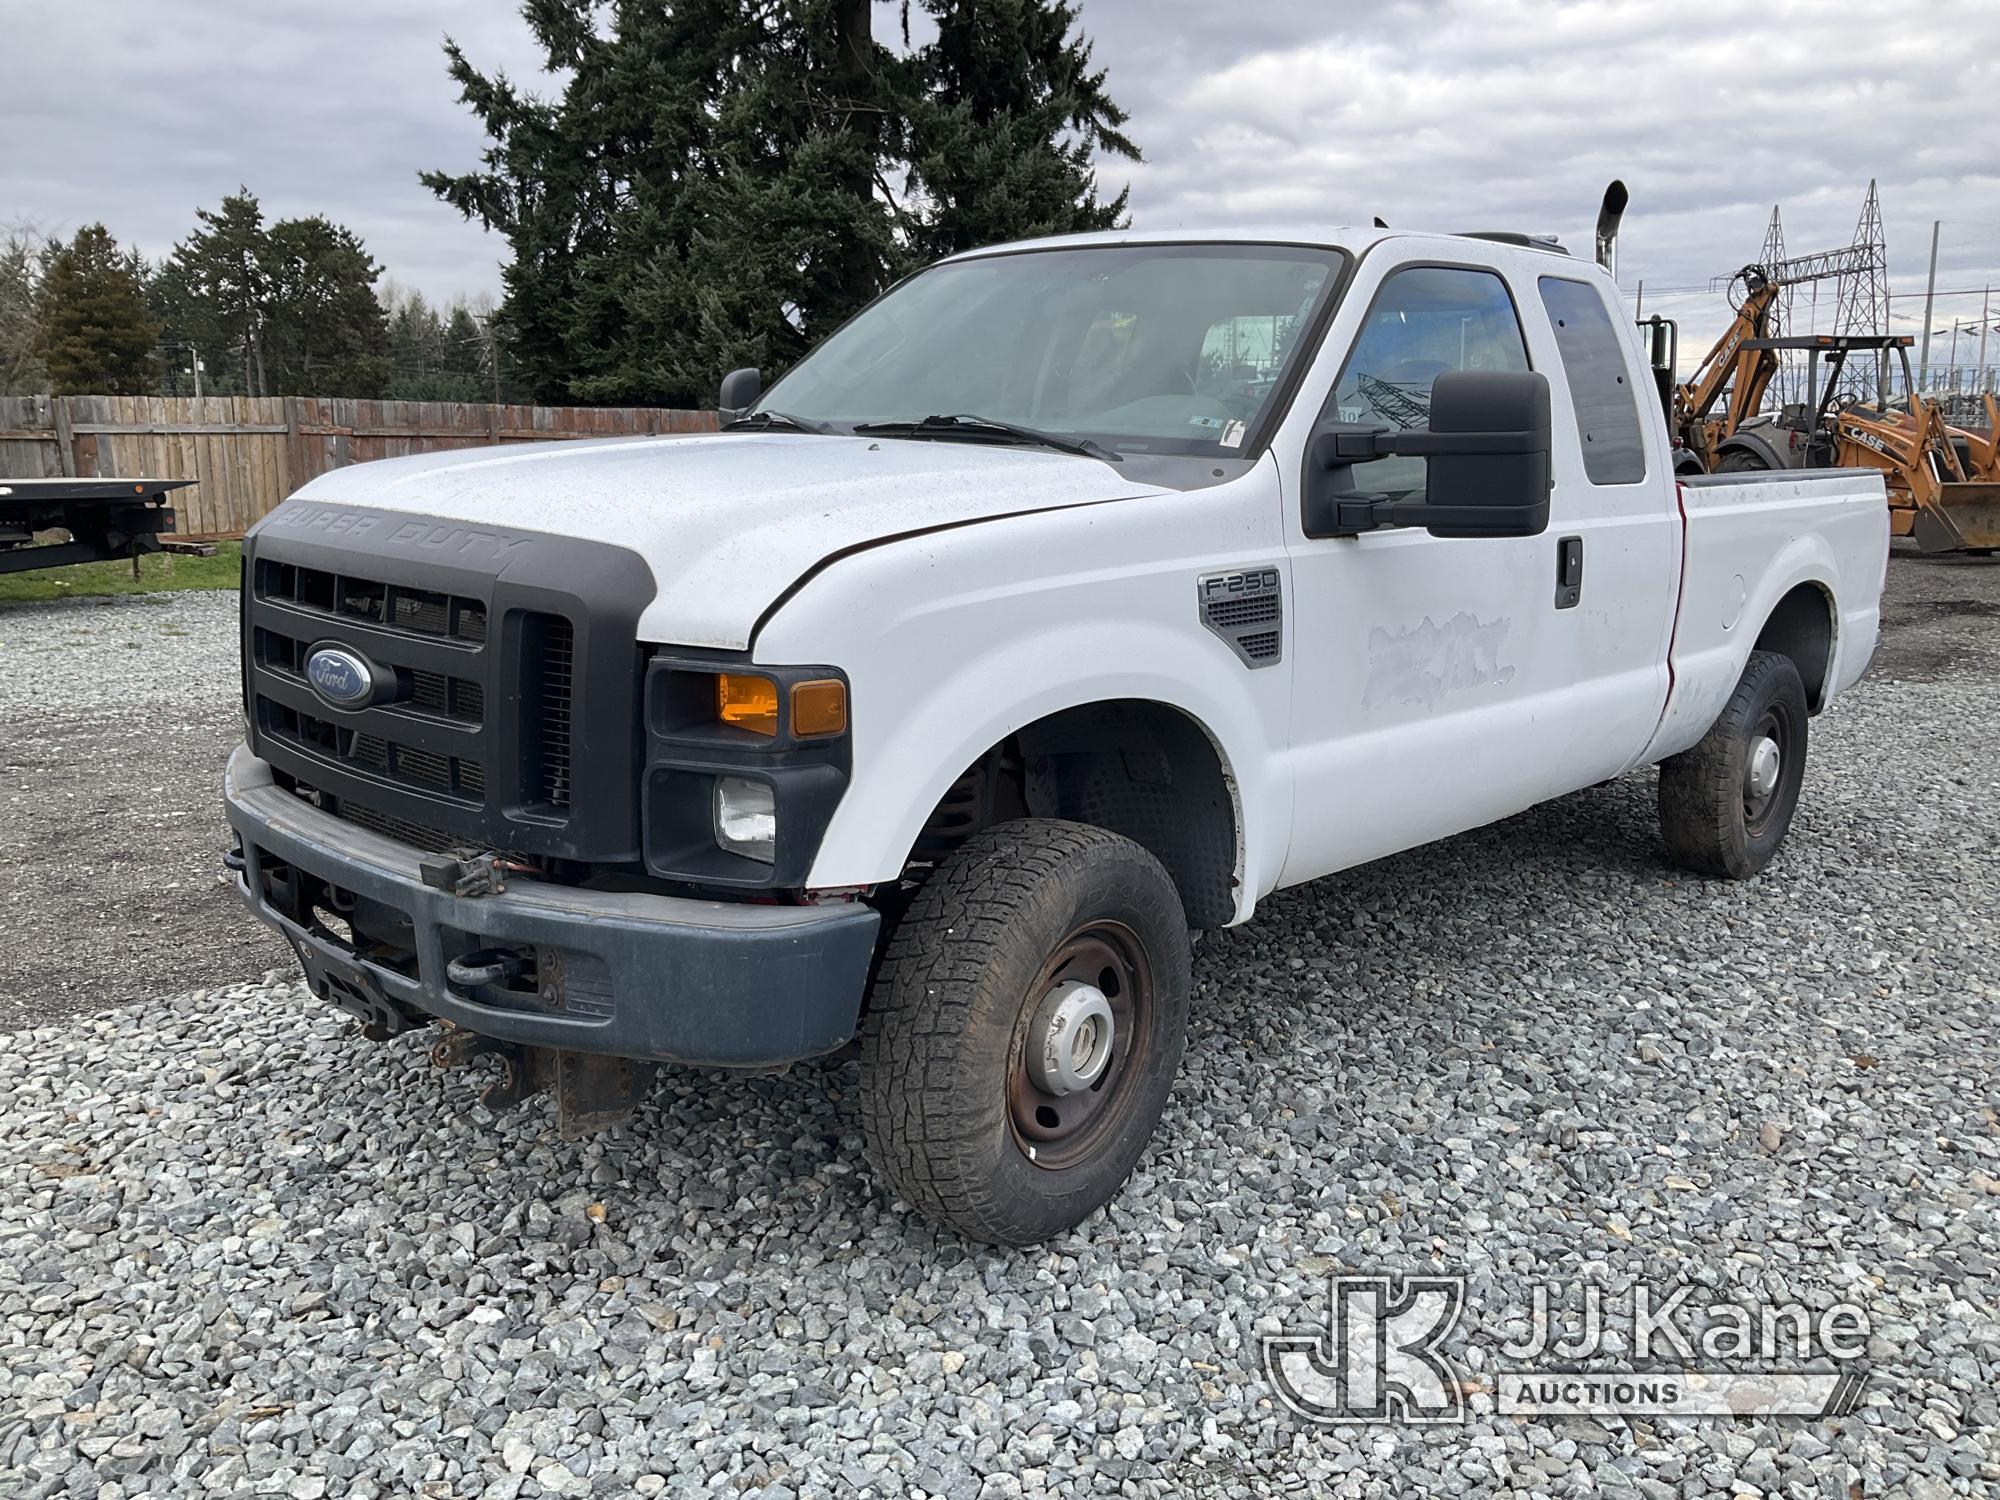 (Tacoma, WA) 2008 Ford F250 4x4 Extended-Cab Pickup Truck Not Running, Condition Unknown) ( Minor Bo